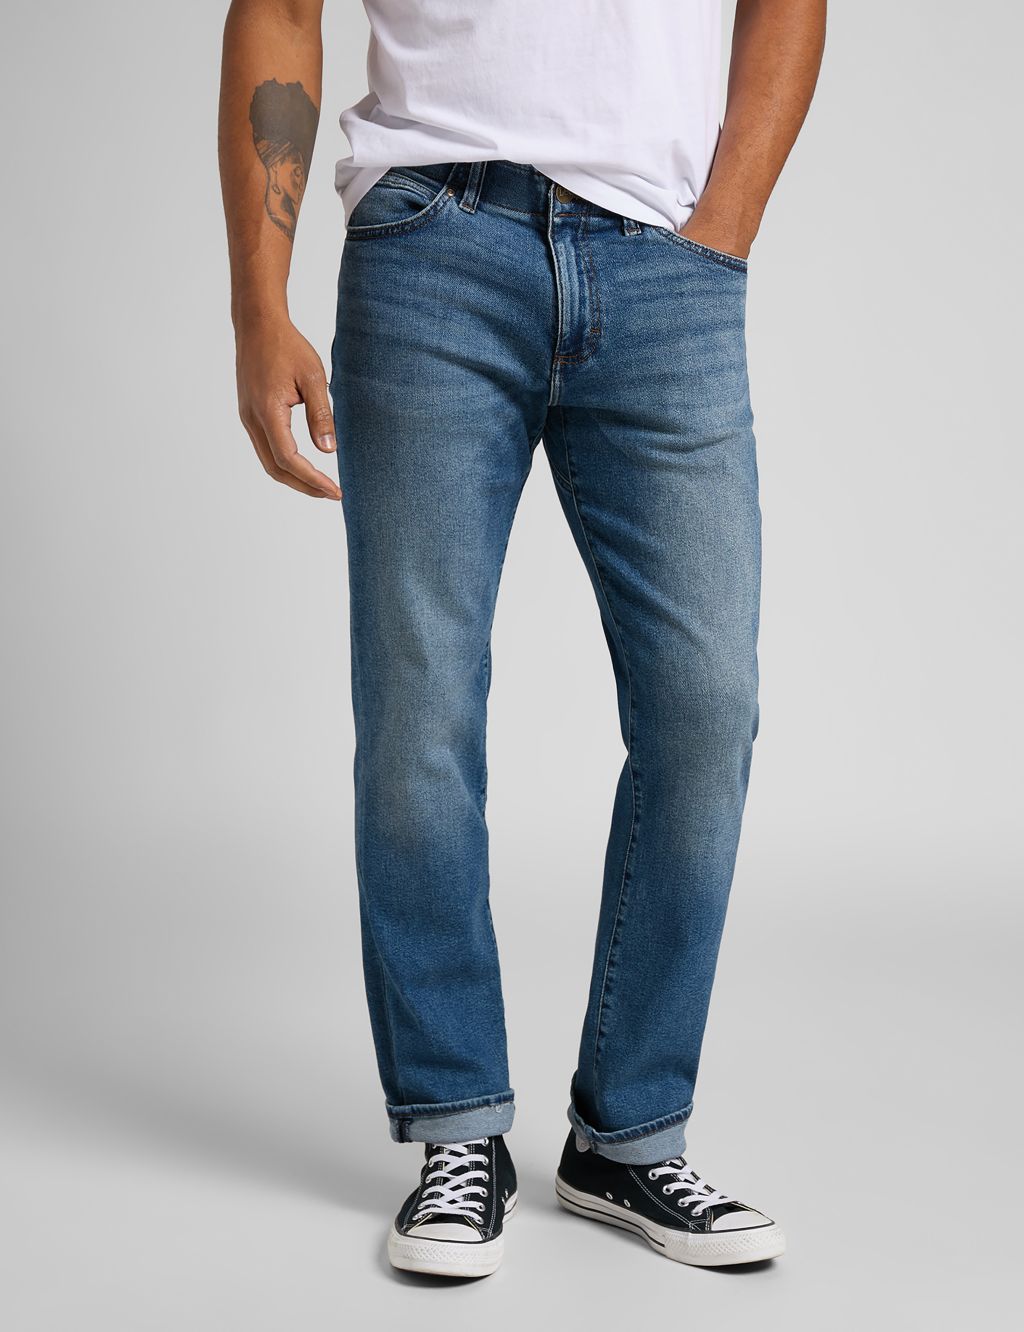 Straight Fit XM 5 Pocket Jeans image 1